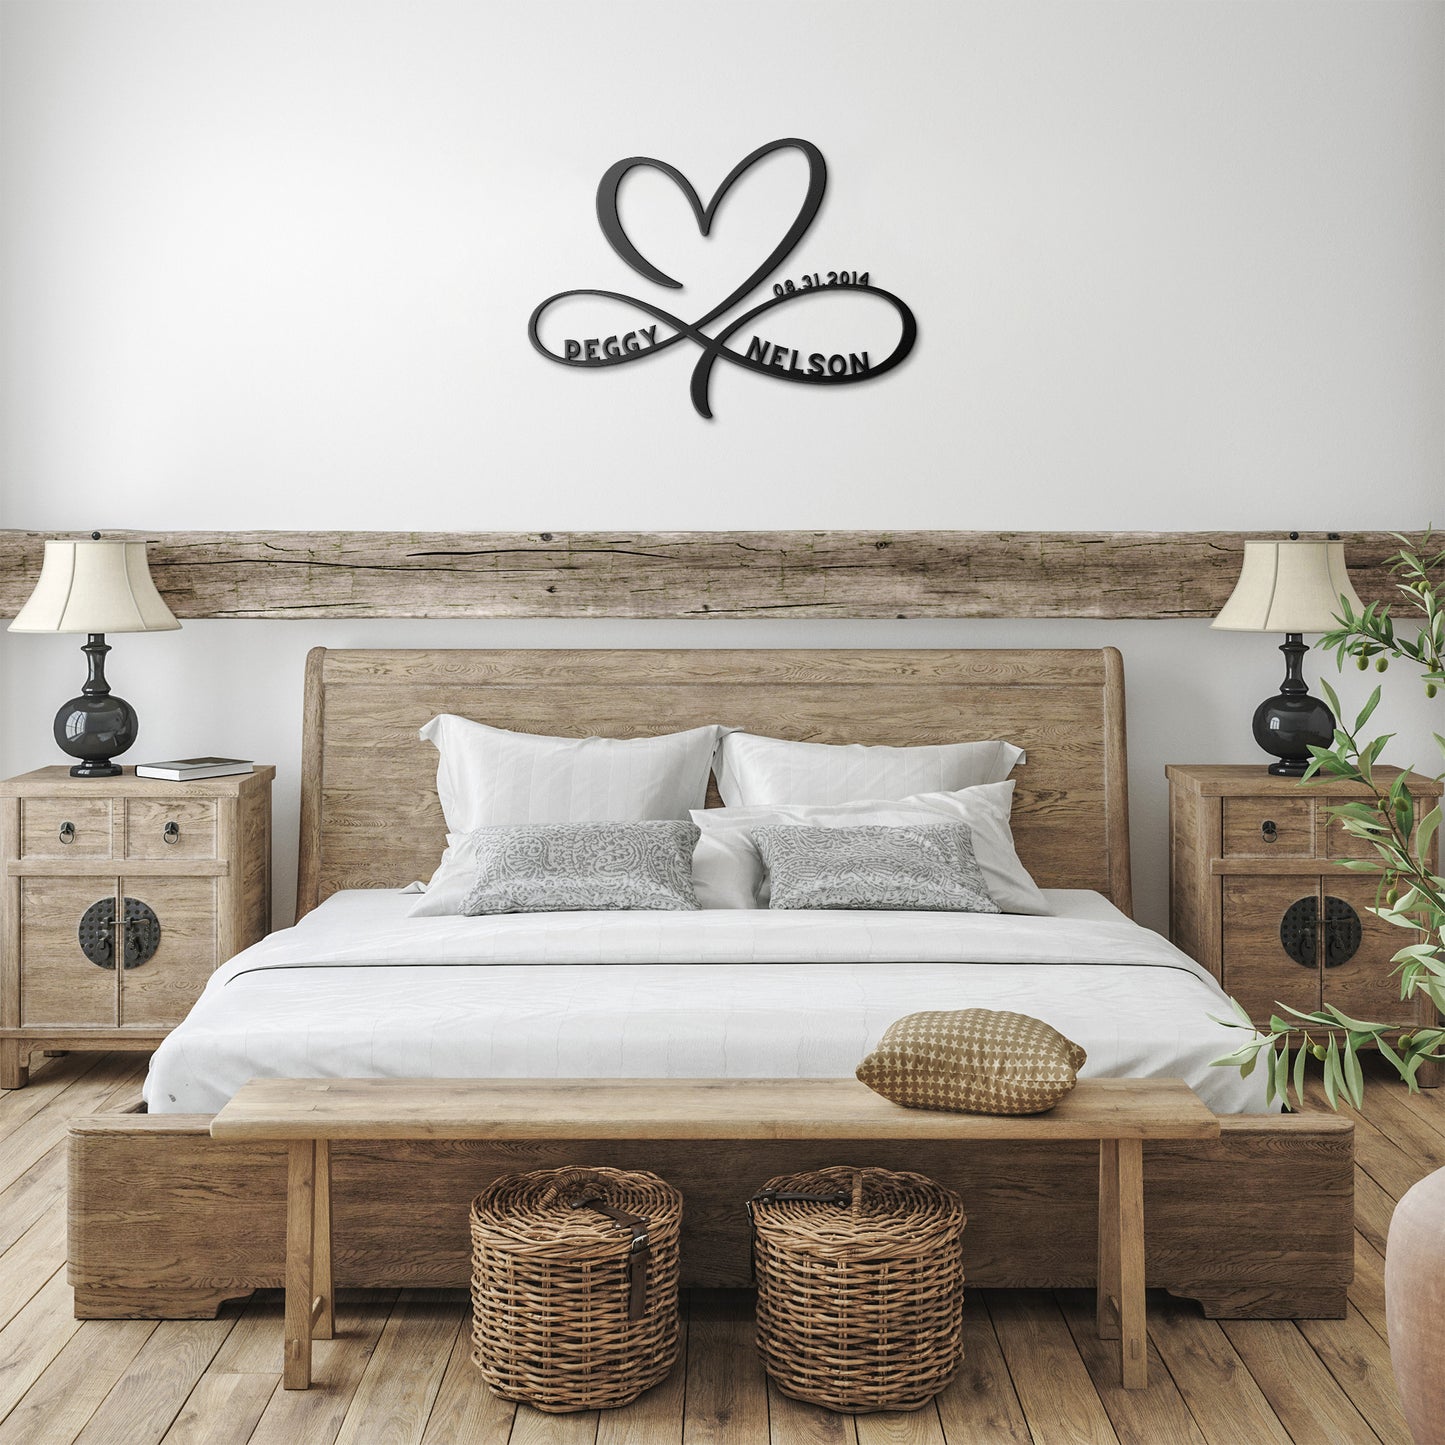 A bedroom with a bed, a bedside table, and a teelaunch Personalized Infinity Love Heart Metal Art Sign.